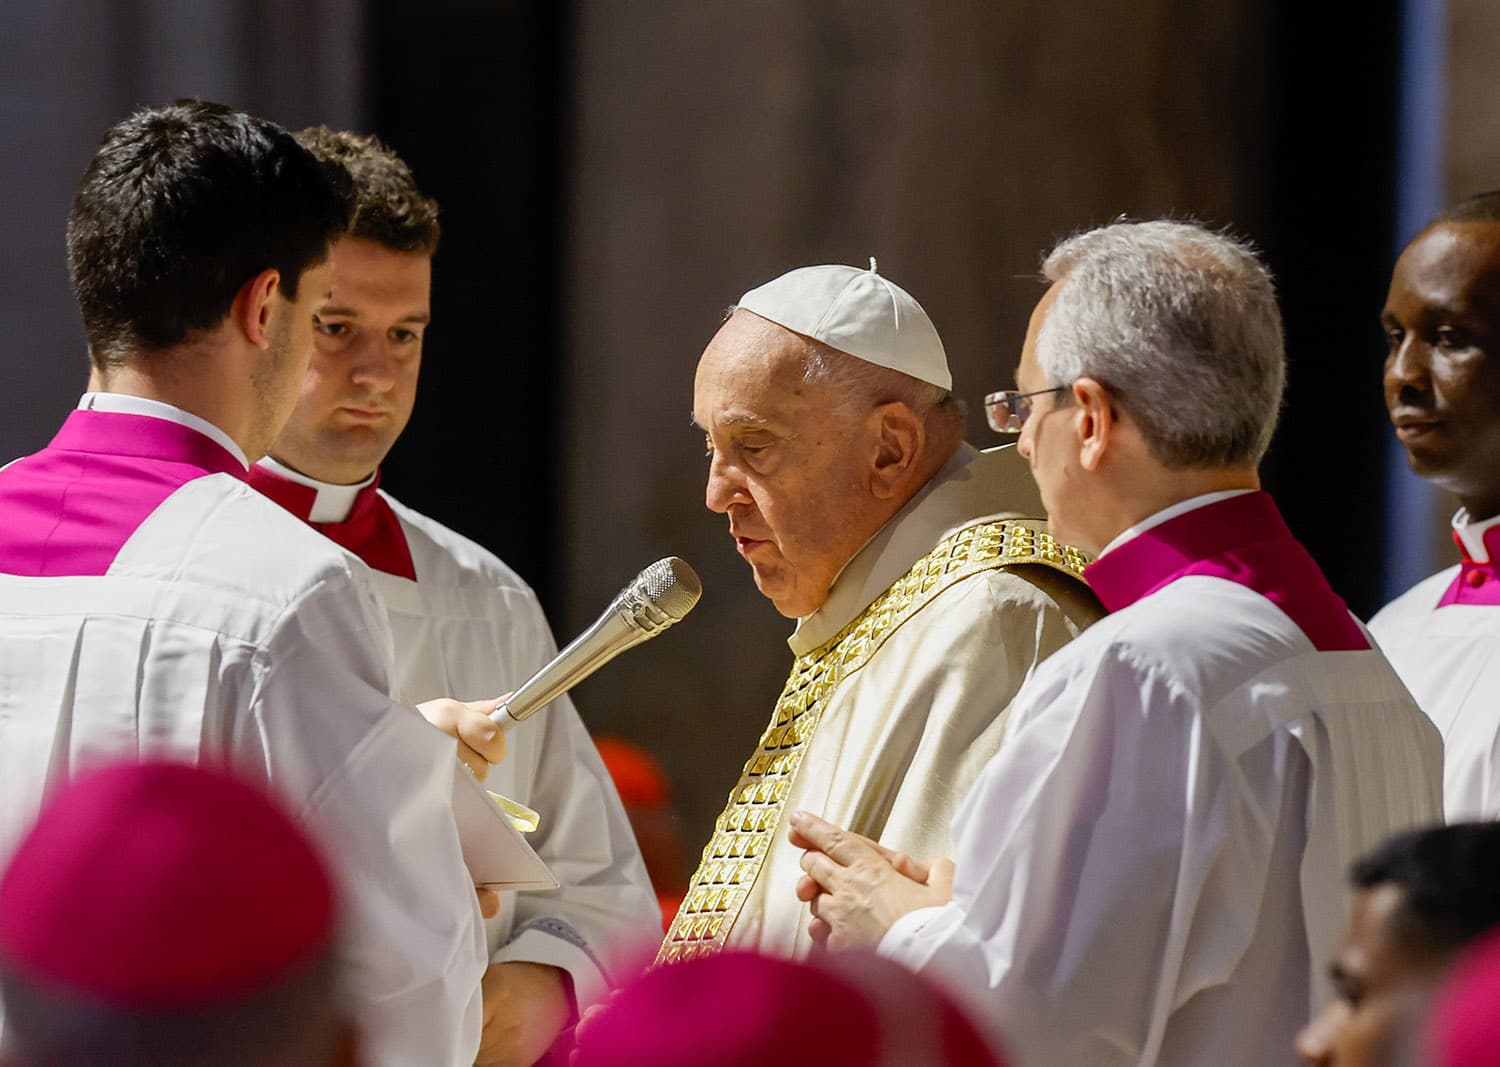 POPE FRANCIS PROCLAIMS HOLY YEAR